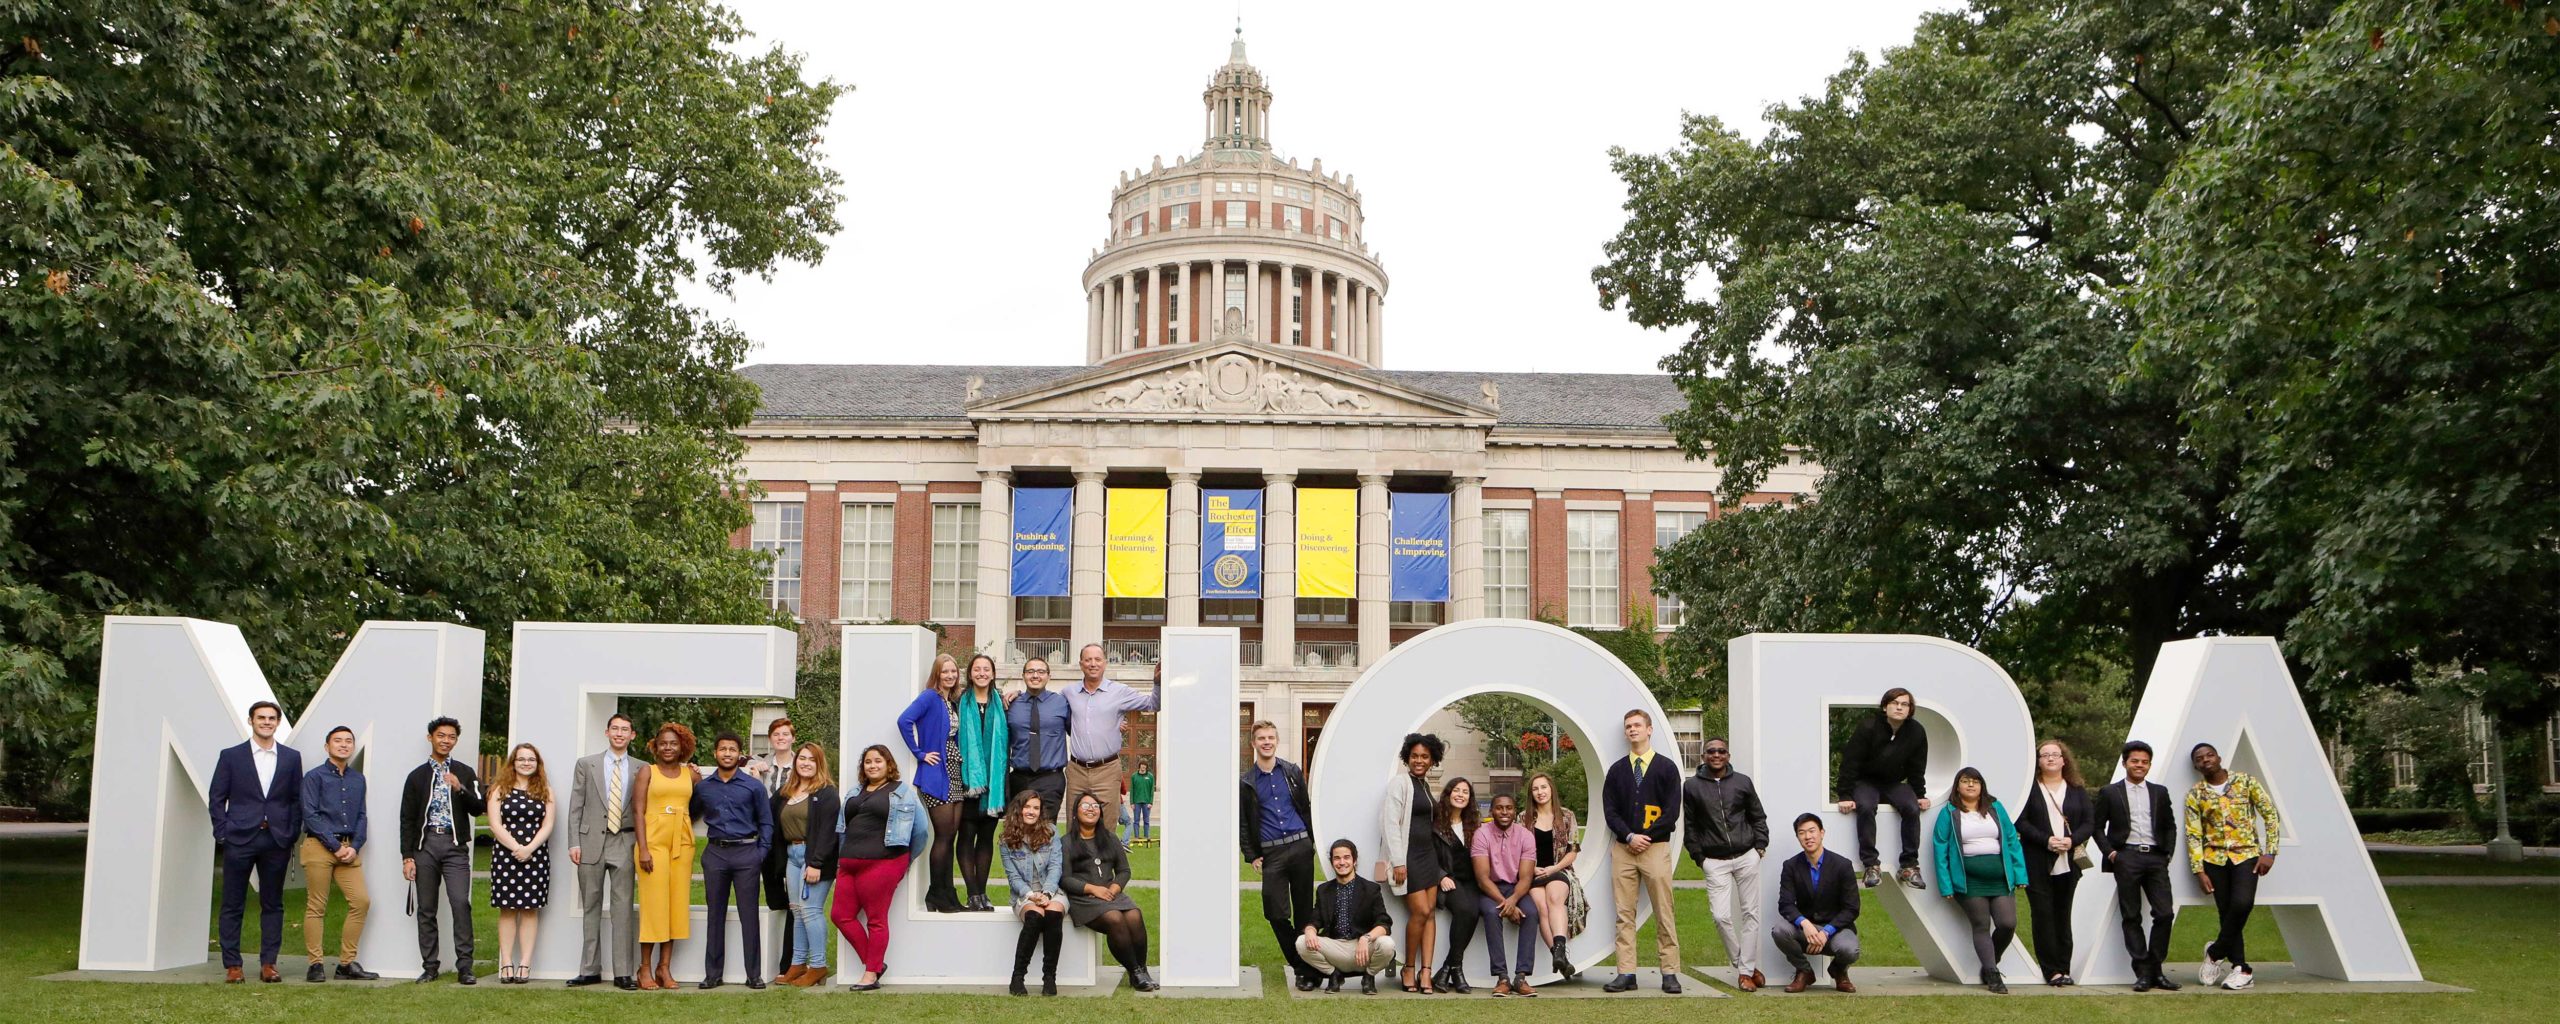 group of handler scholars students standing in front of large meliora letters in quad with rush rhees in background